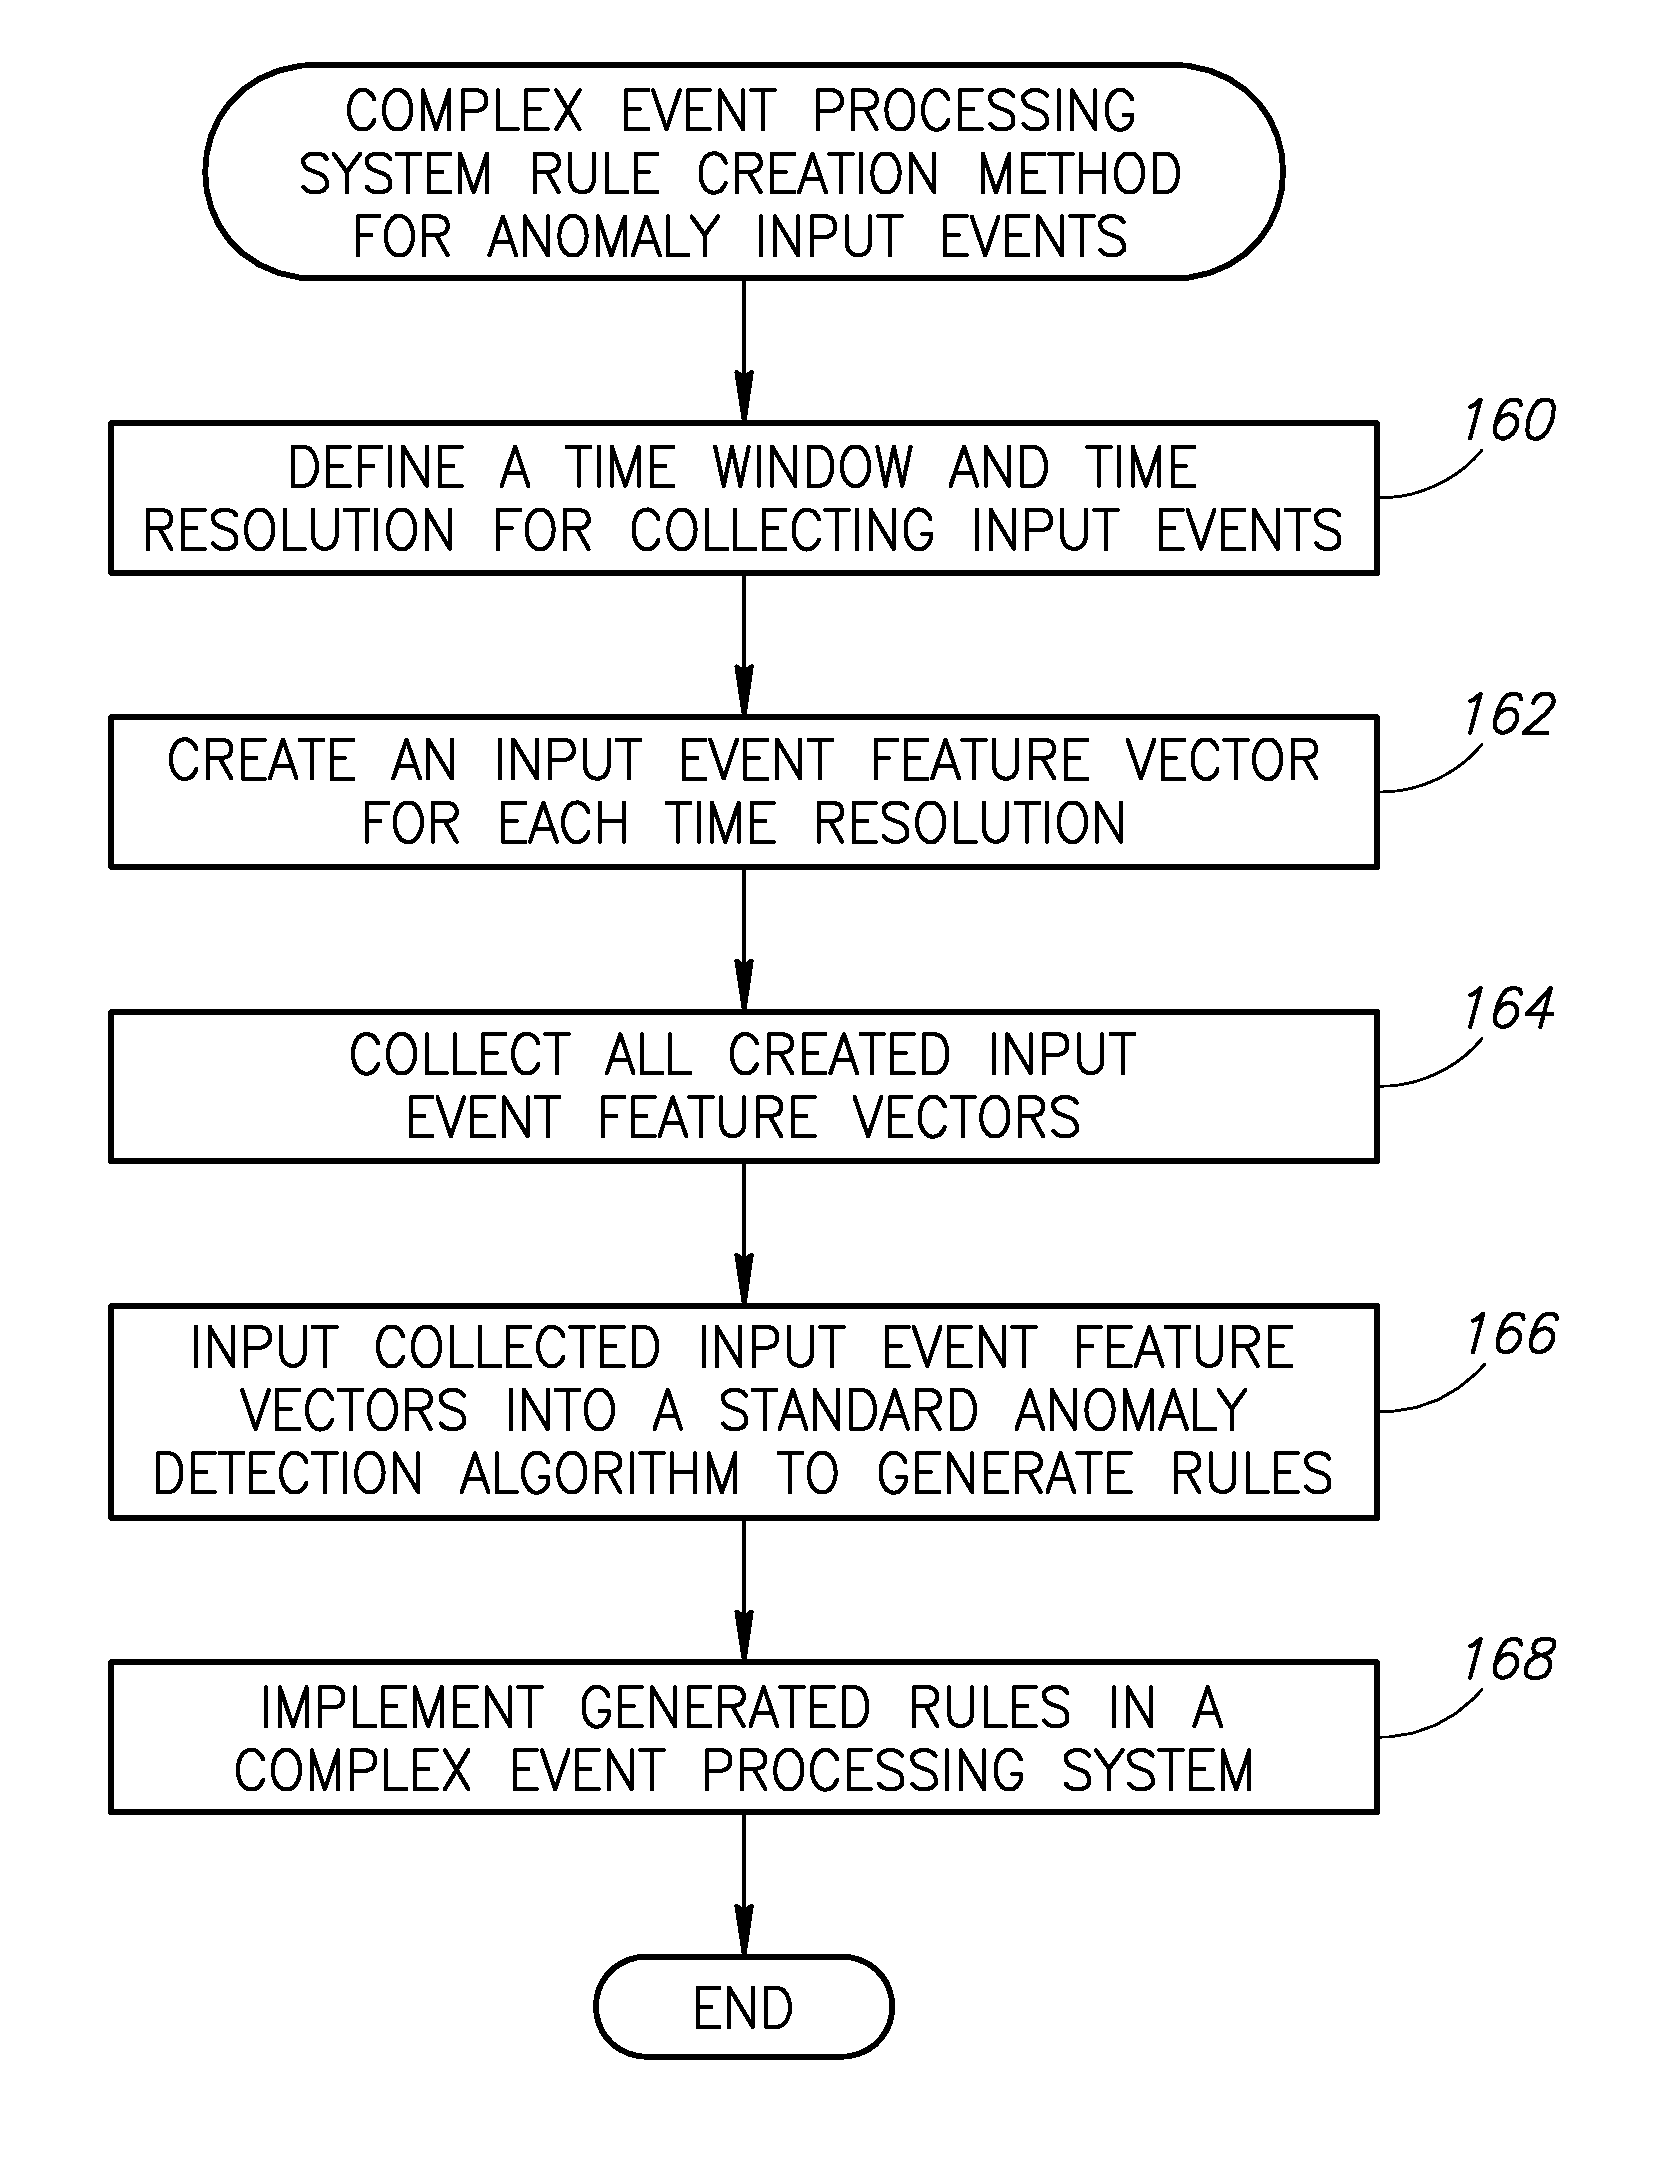 Generating complex event processing rules utilizing machine learning from multiple events